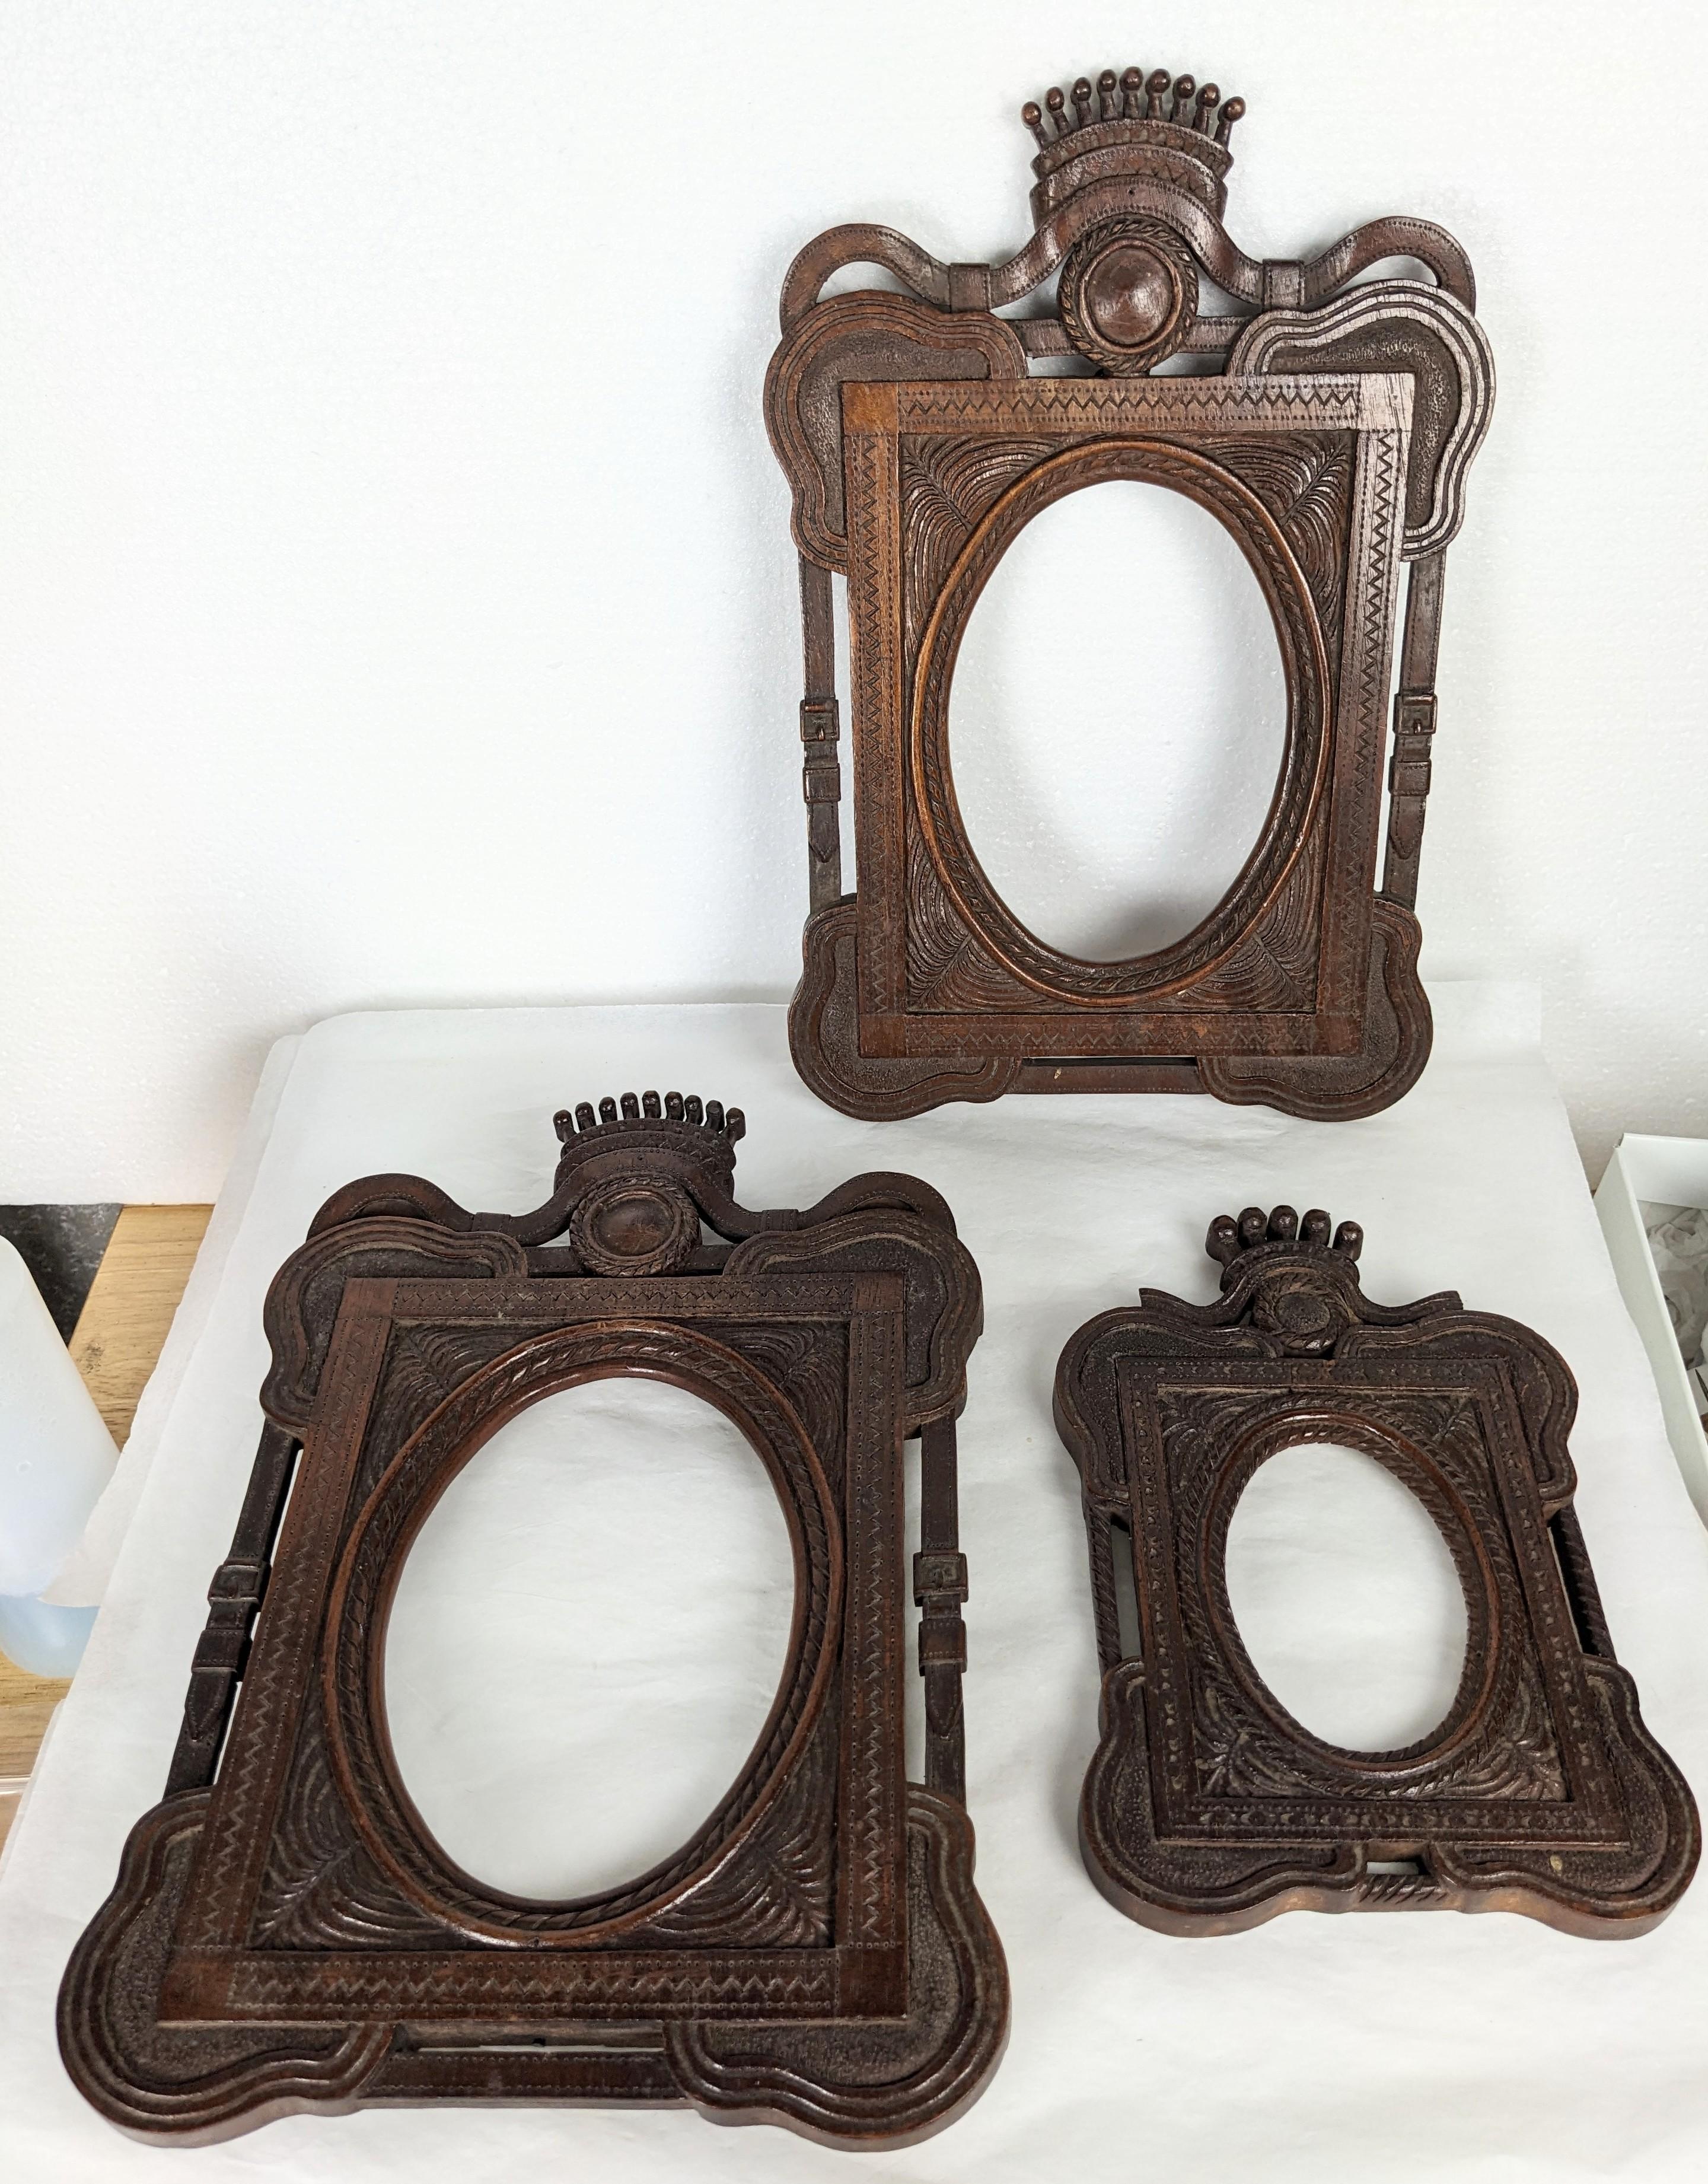 Charming set of 3 Hand Carved 19th Century European Frames. Beautifully hand carved wood (walnut?) with motifs with buckle straps, rope work and crown tops. Possibly Black Forest work, Germany-Austrian circa 1880's. (2) Large 11